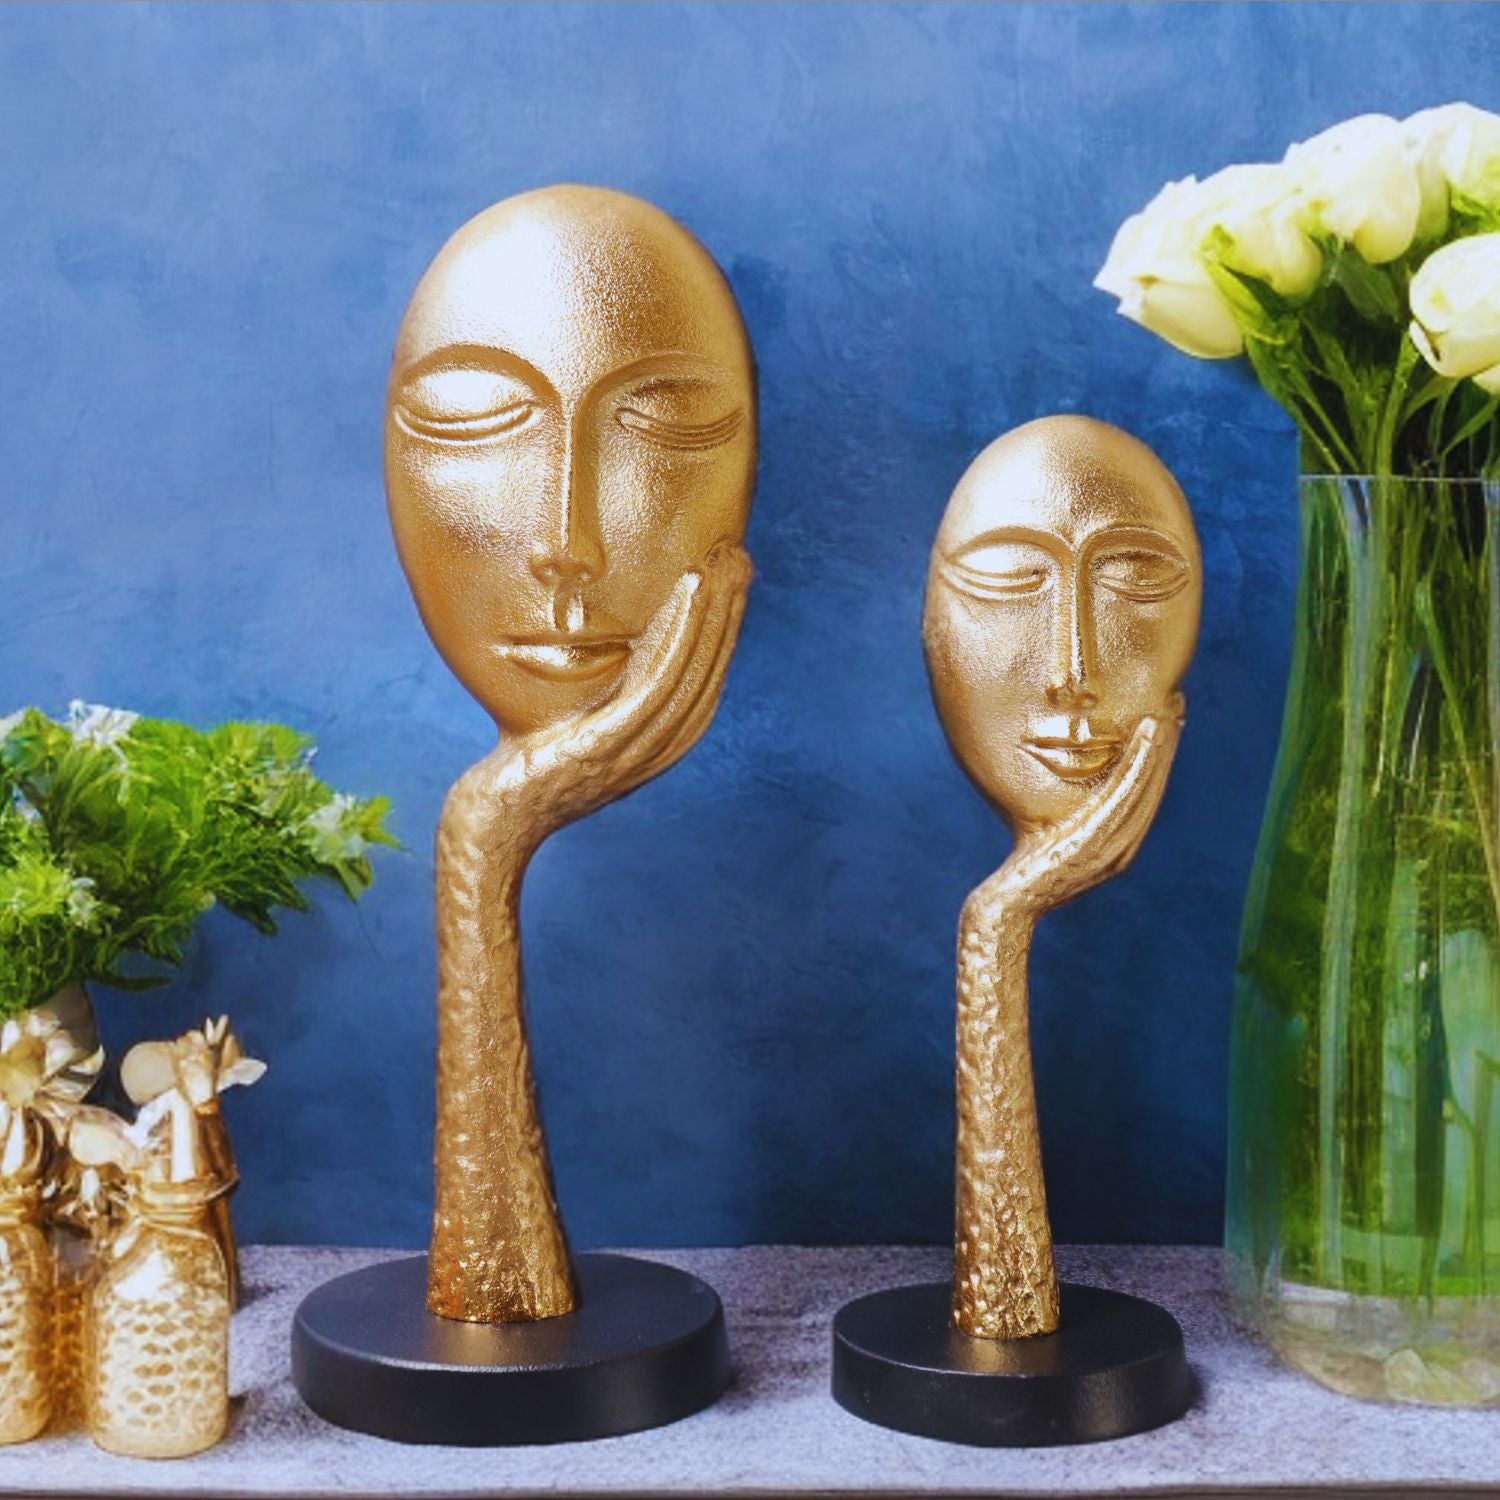 Thinking Lady face Sculpture Gold